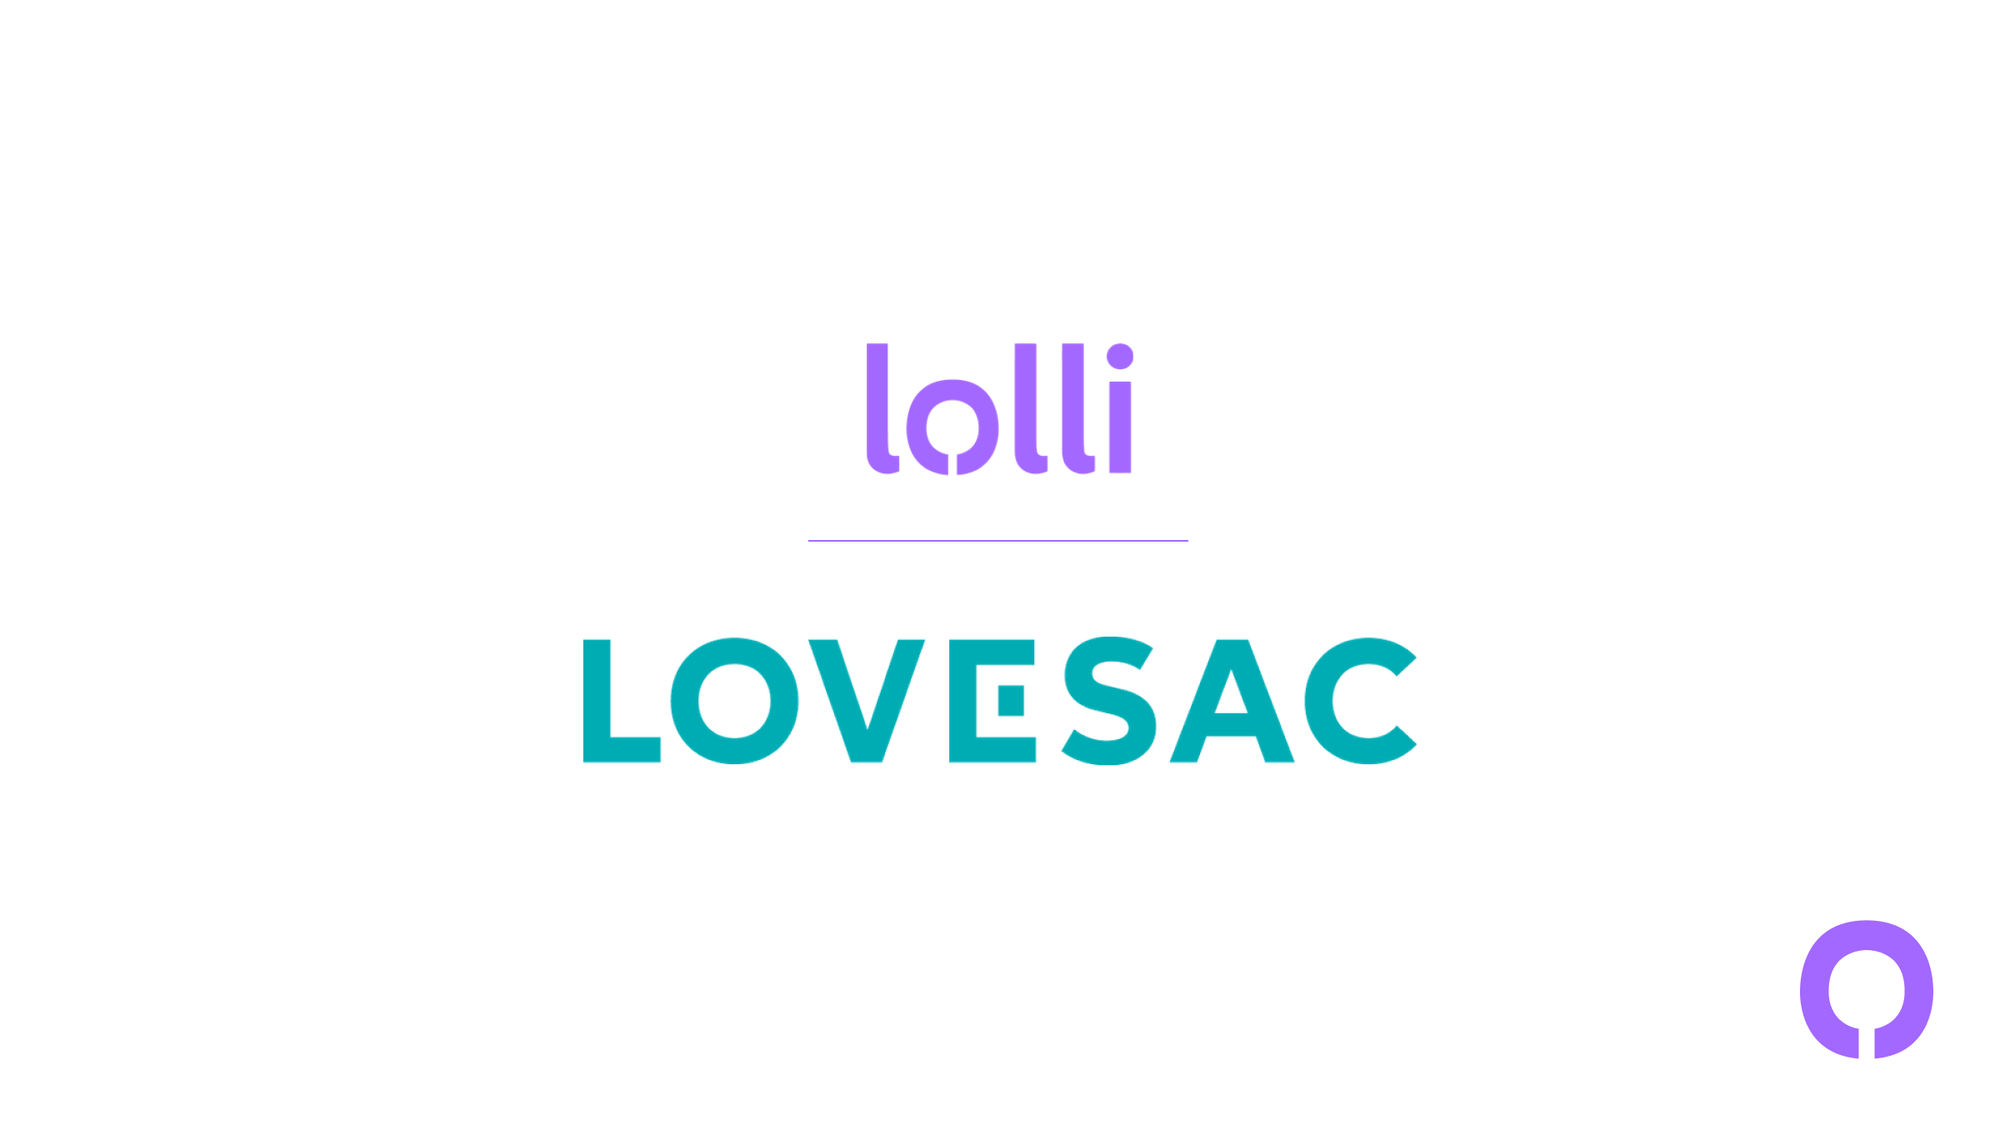 Lovesac Partners with Lolli to Offer In-store Rewards!